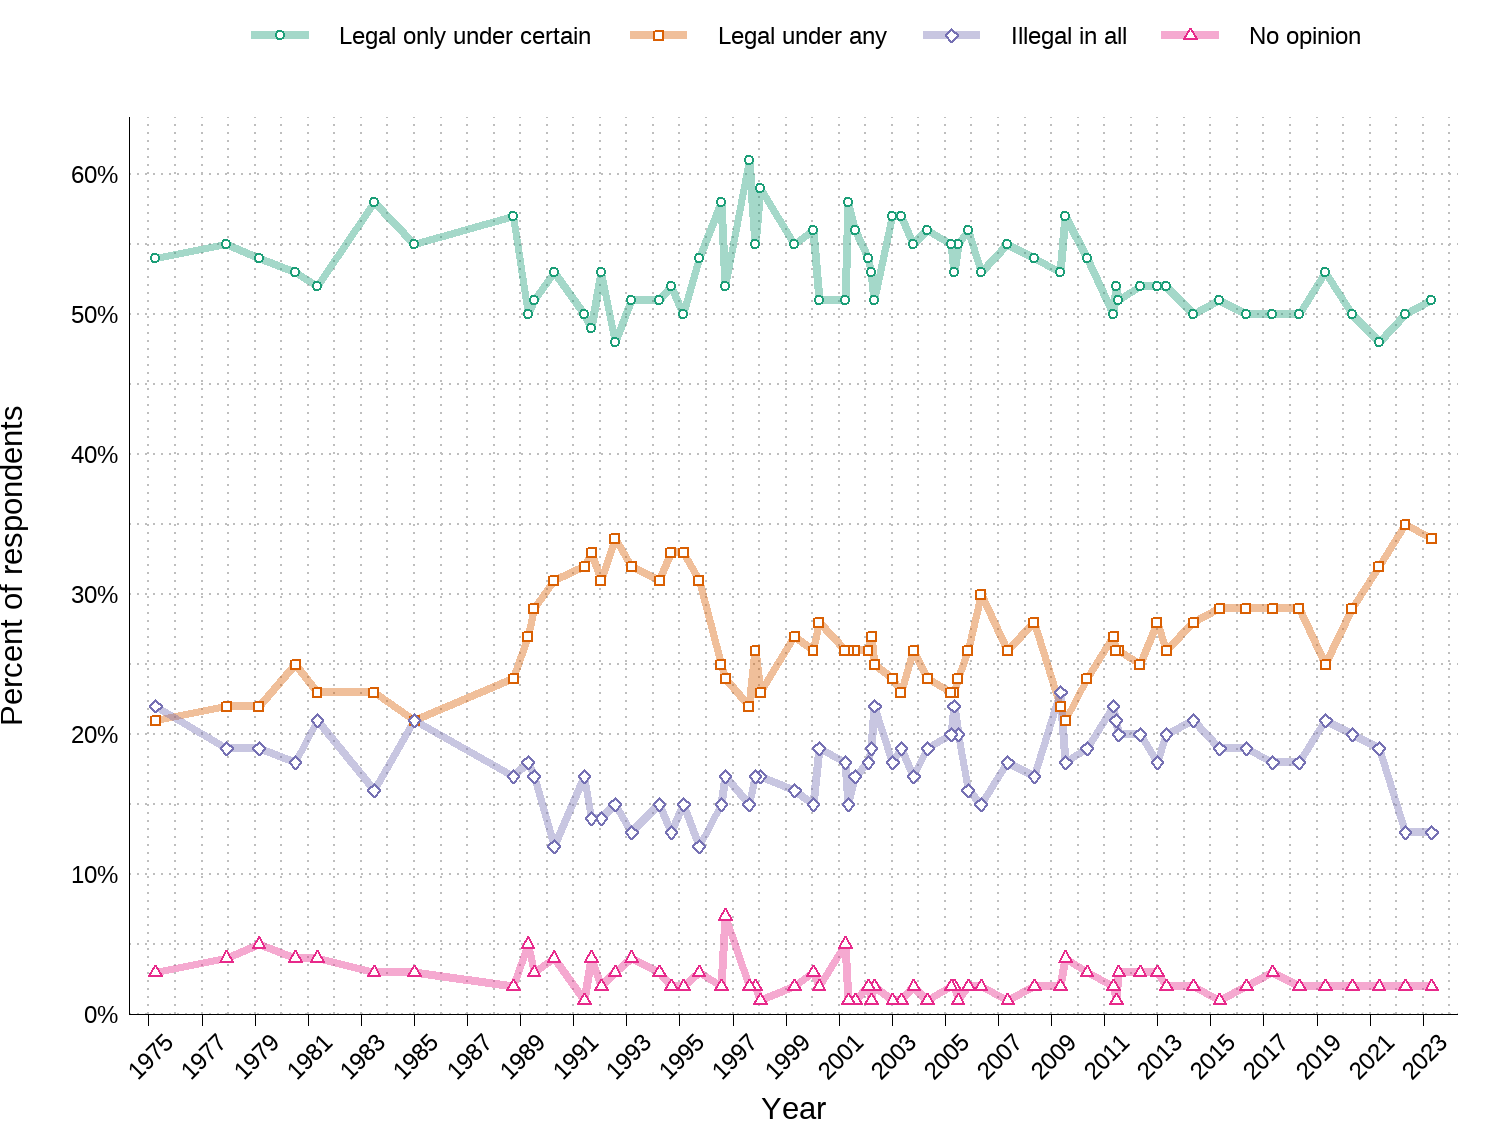 Distributions of responses over time to question 'Do you think abortions should be legal under any circumstances, legal only under certain circumstances or illegal in all circumstances?' in Gallup polling. [@gallup_abortion_in_depth]